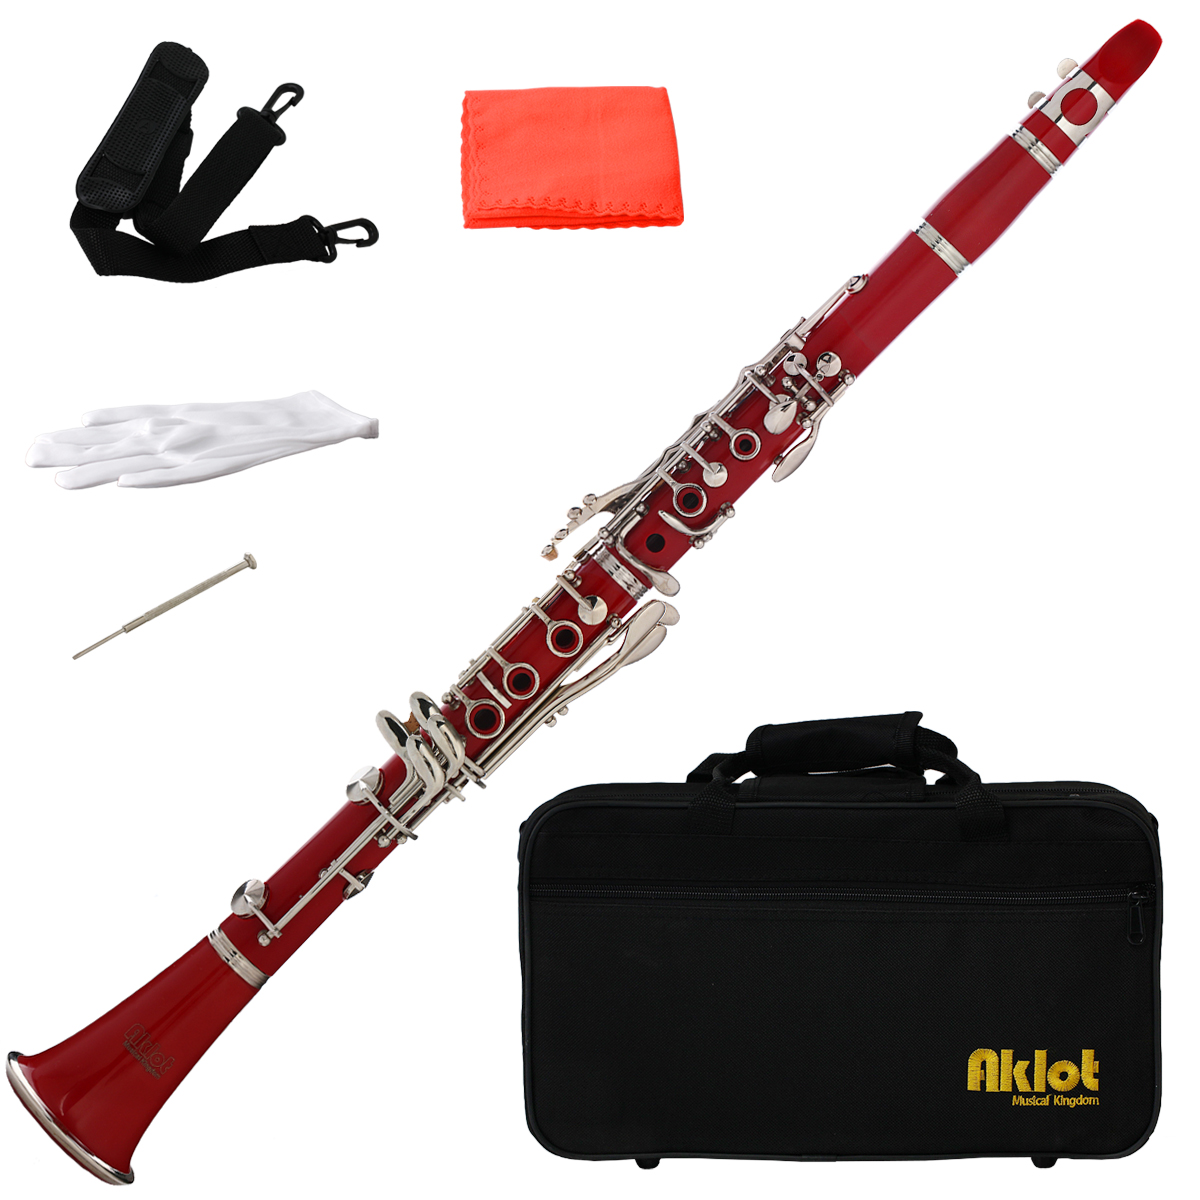 Aklot Bb Beginner Clarinet 17 Keys with Durable Red ABS Body with Reed Best for Student